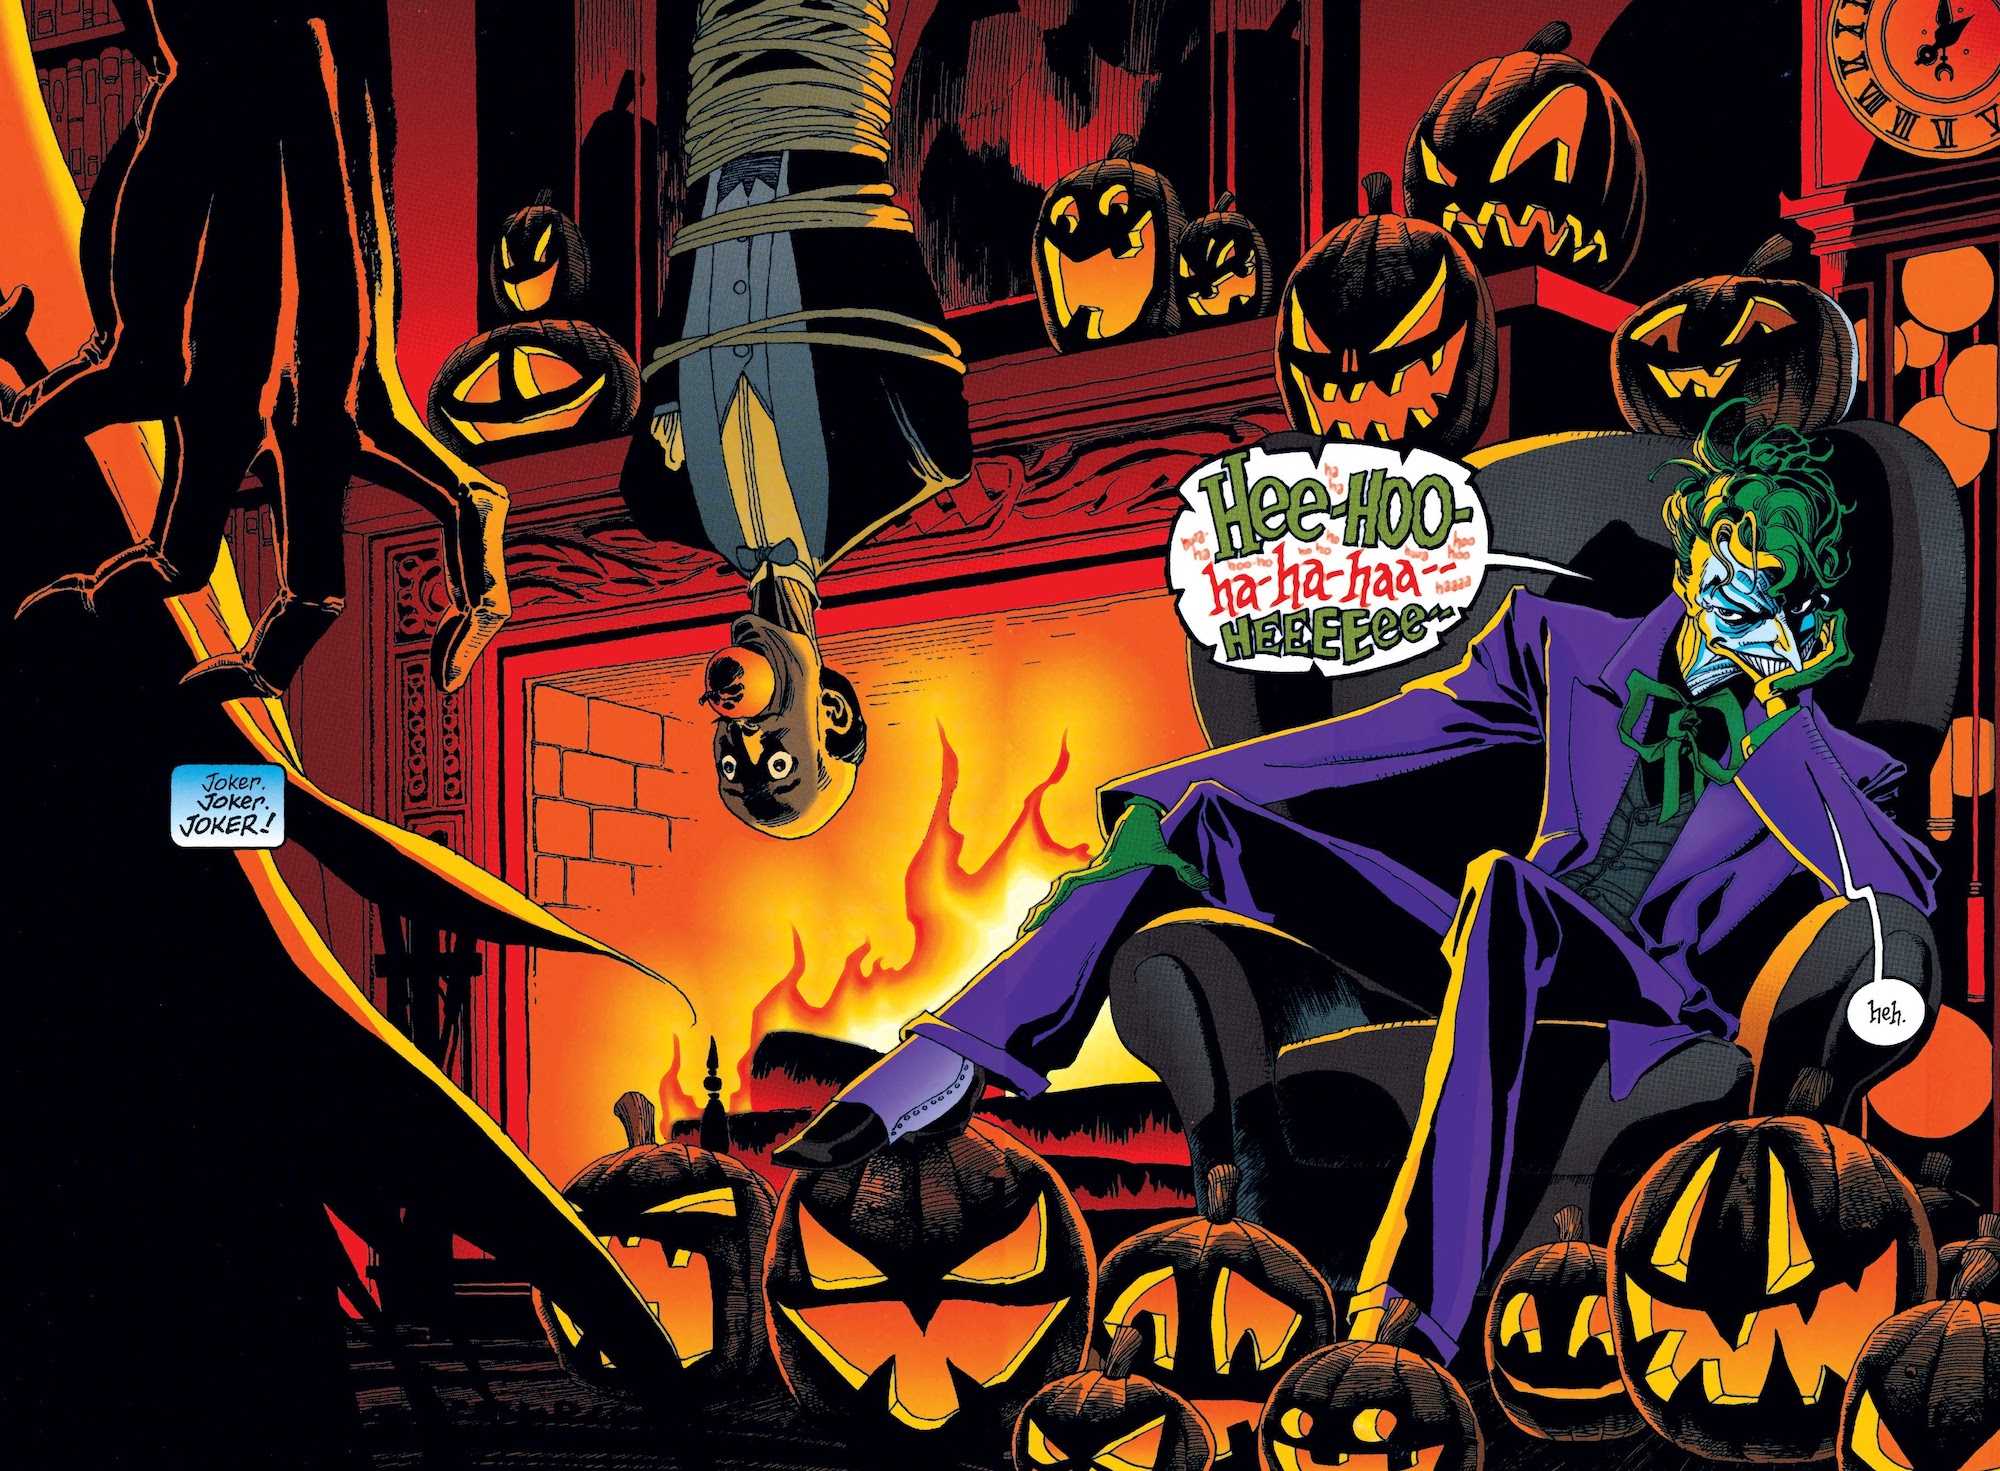 This image is from the comic; Batman: Legends of the Dark Knight Halloween Special Vol 1 #3 (1995), where the Joker came to visit Batman in his nightmare. 